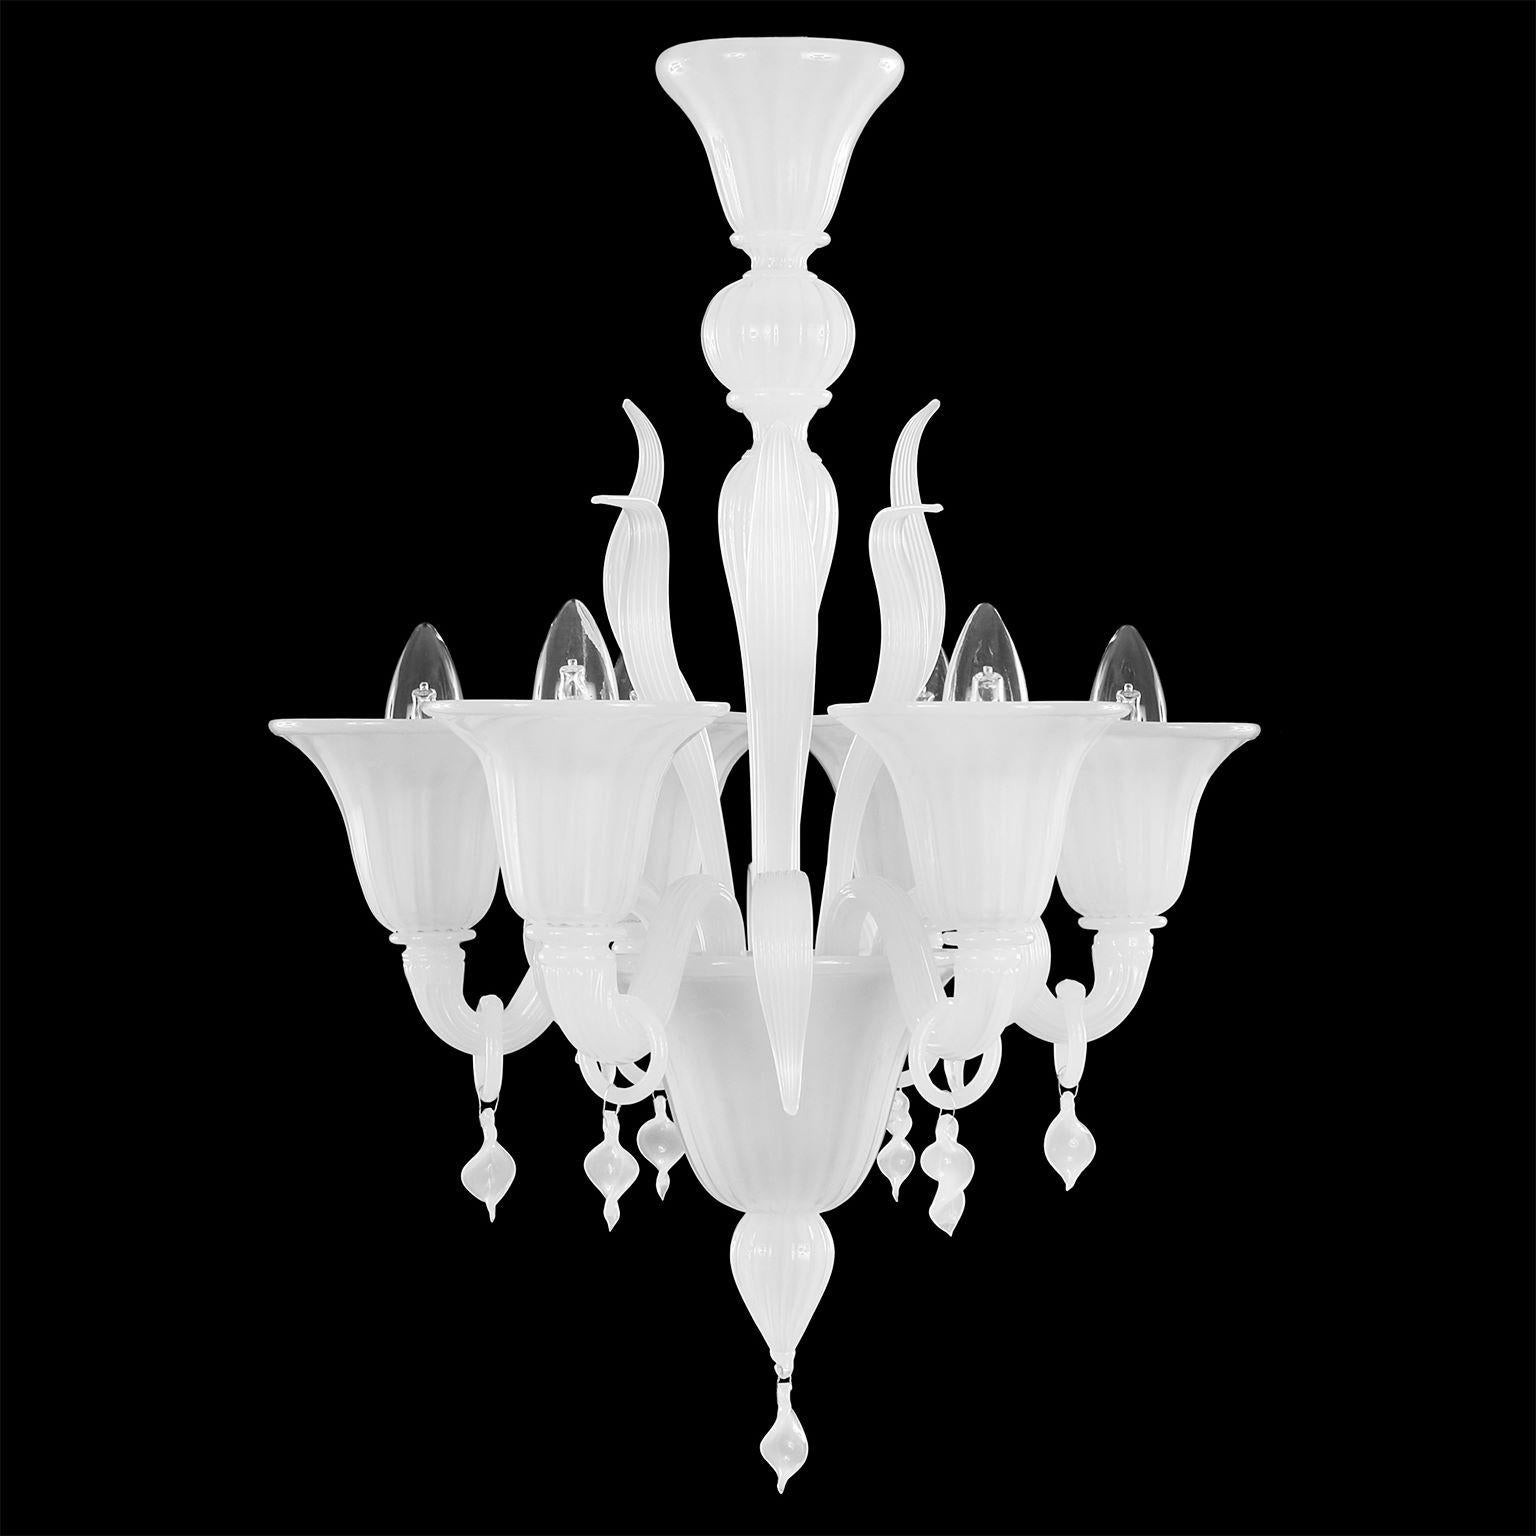 Fluage chandelier 6 lights white silk Murano glass with rings by Multiforme
The blown glass chandelier Fluage is the perfect combination between the Venetian tradition and the most refined design. To manufacture the blown glass chandelier Fluage,